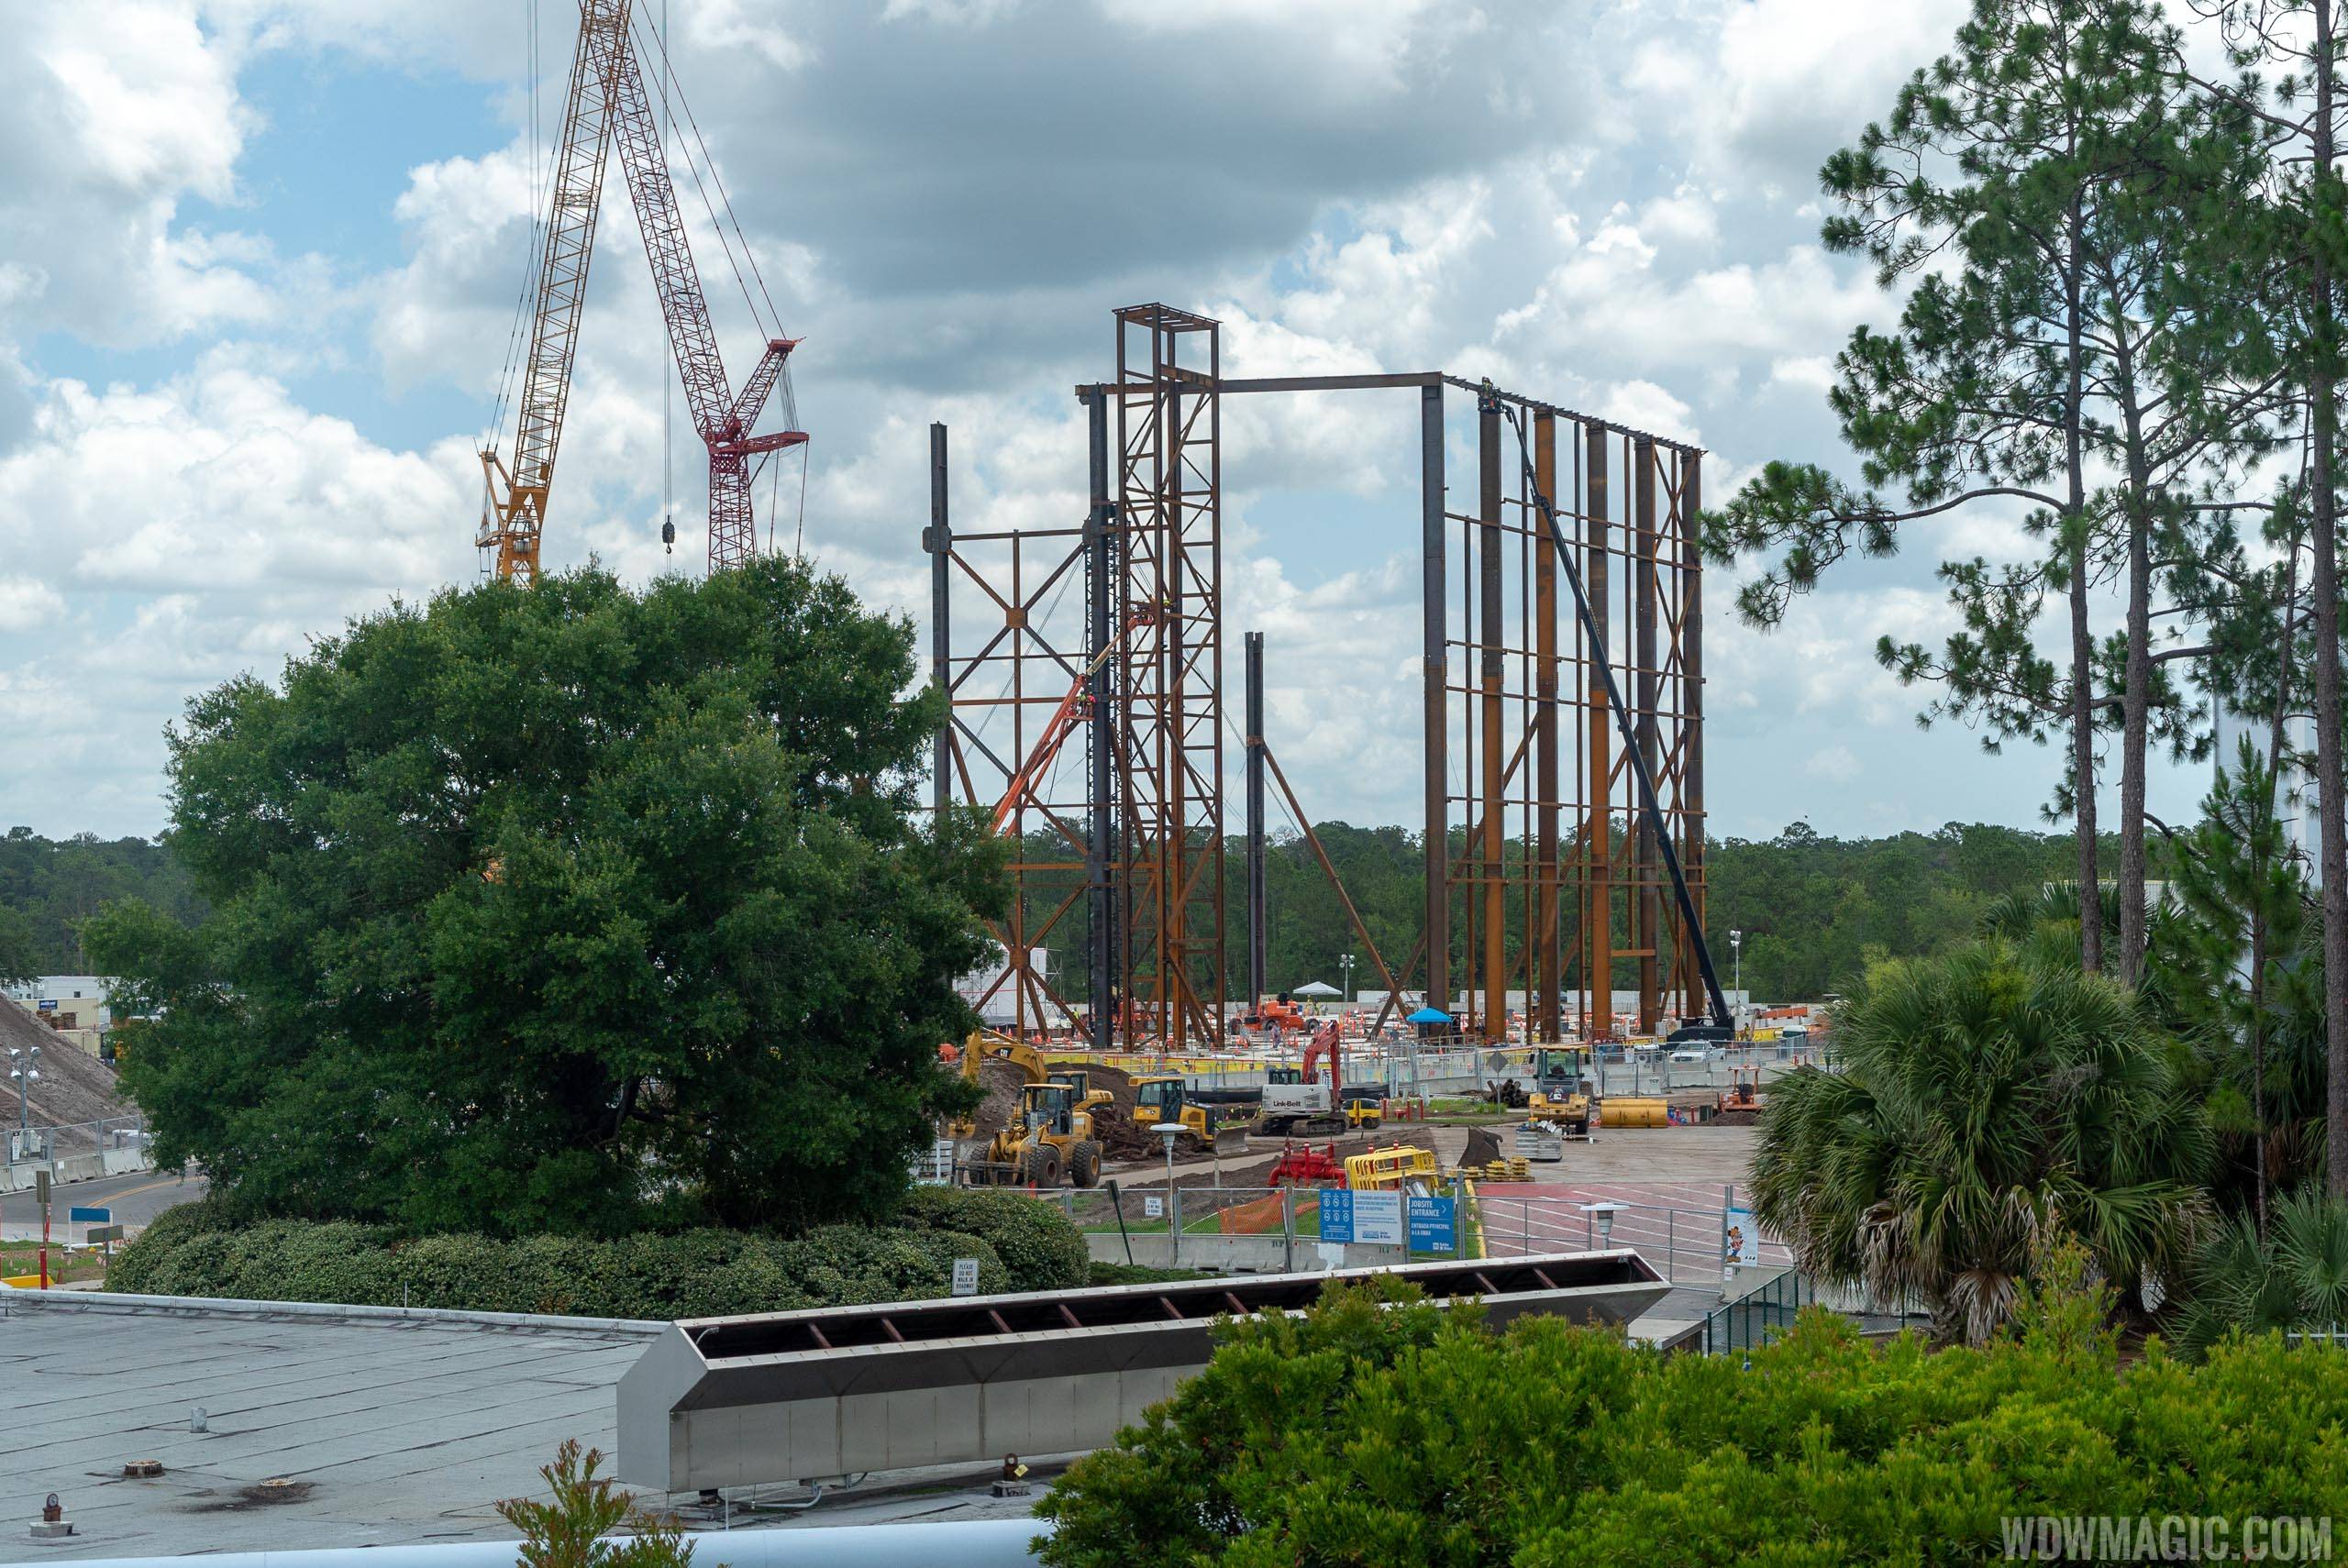 Guardians of the Galaxy coaster construction - June 2018